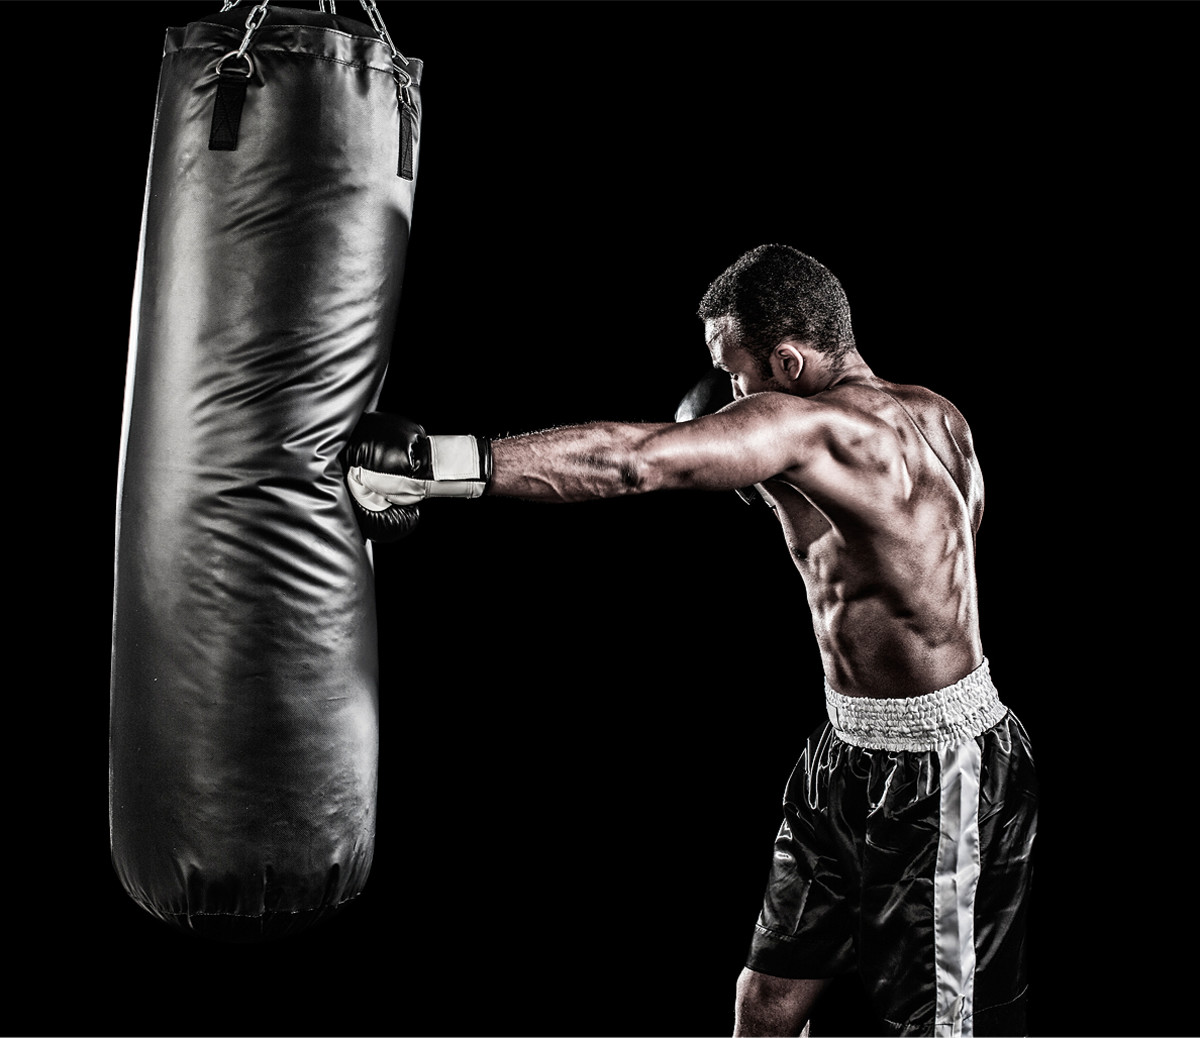 5 Boxing Workout Routines to Get in Lean Fighting Shape